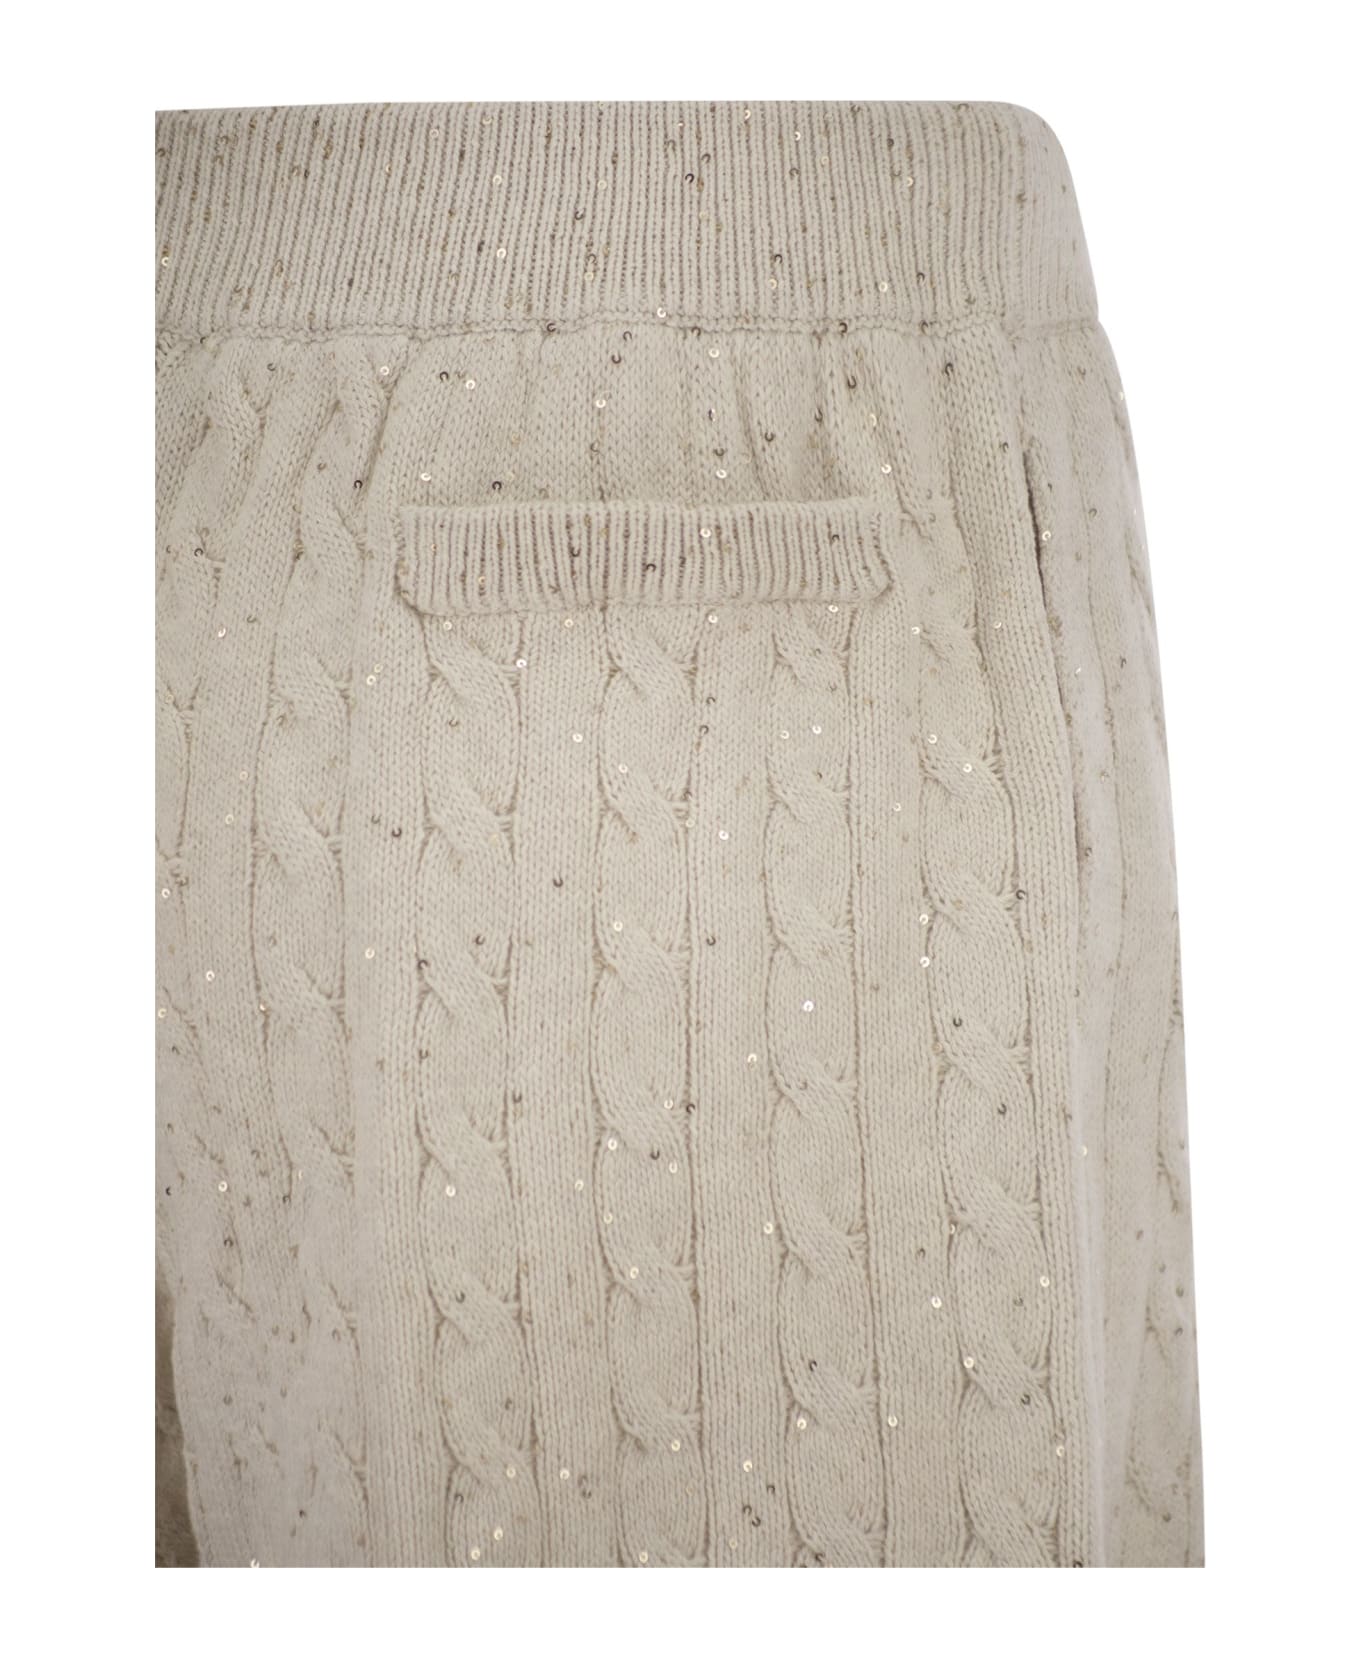 Brunello Cucinelli Cotton Knit Shorts With Sequins - Oat